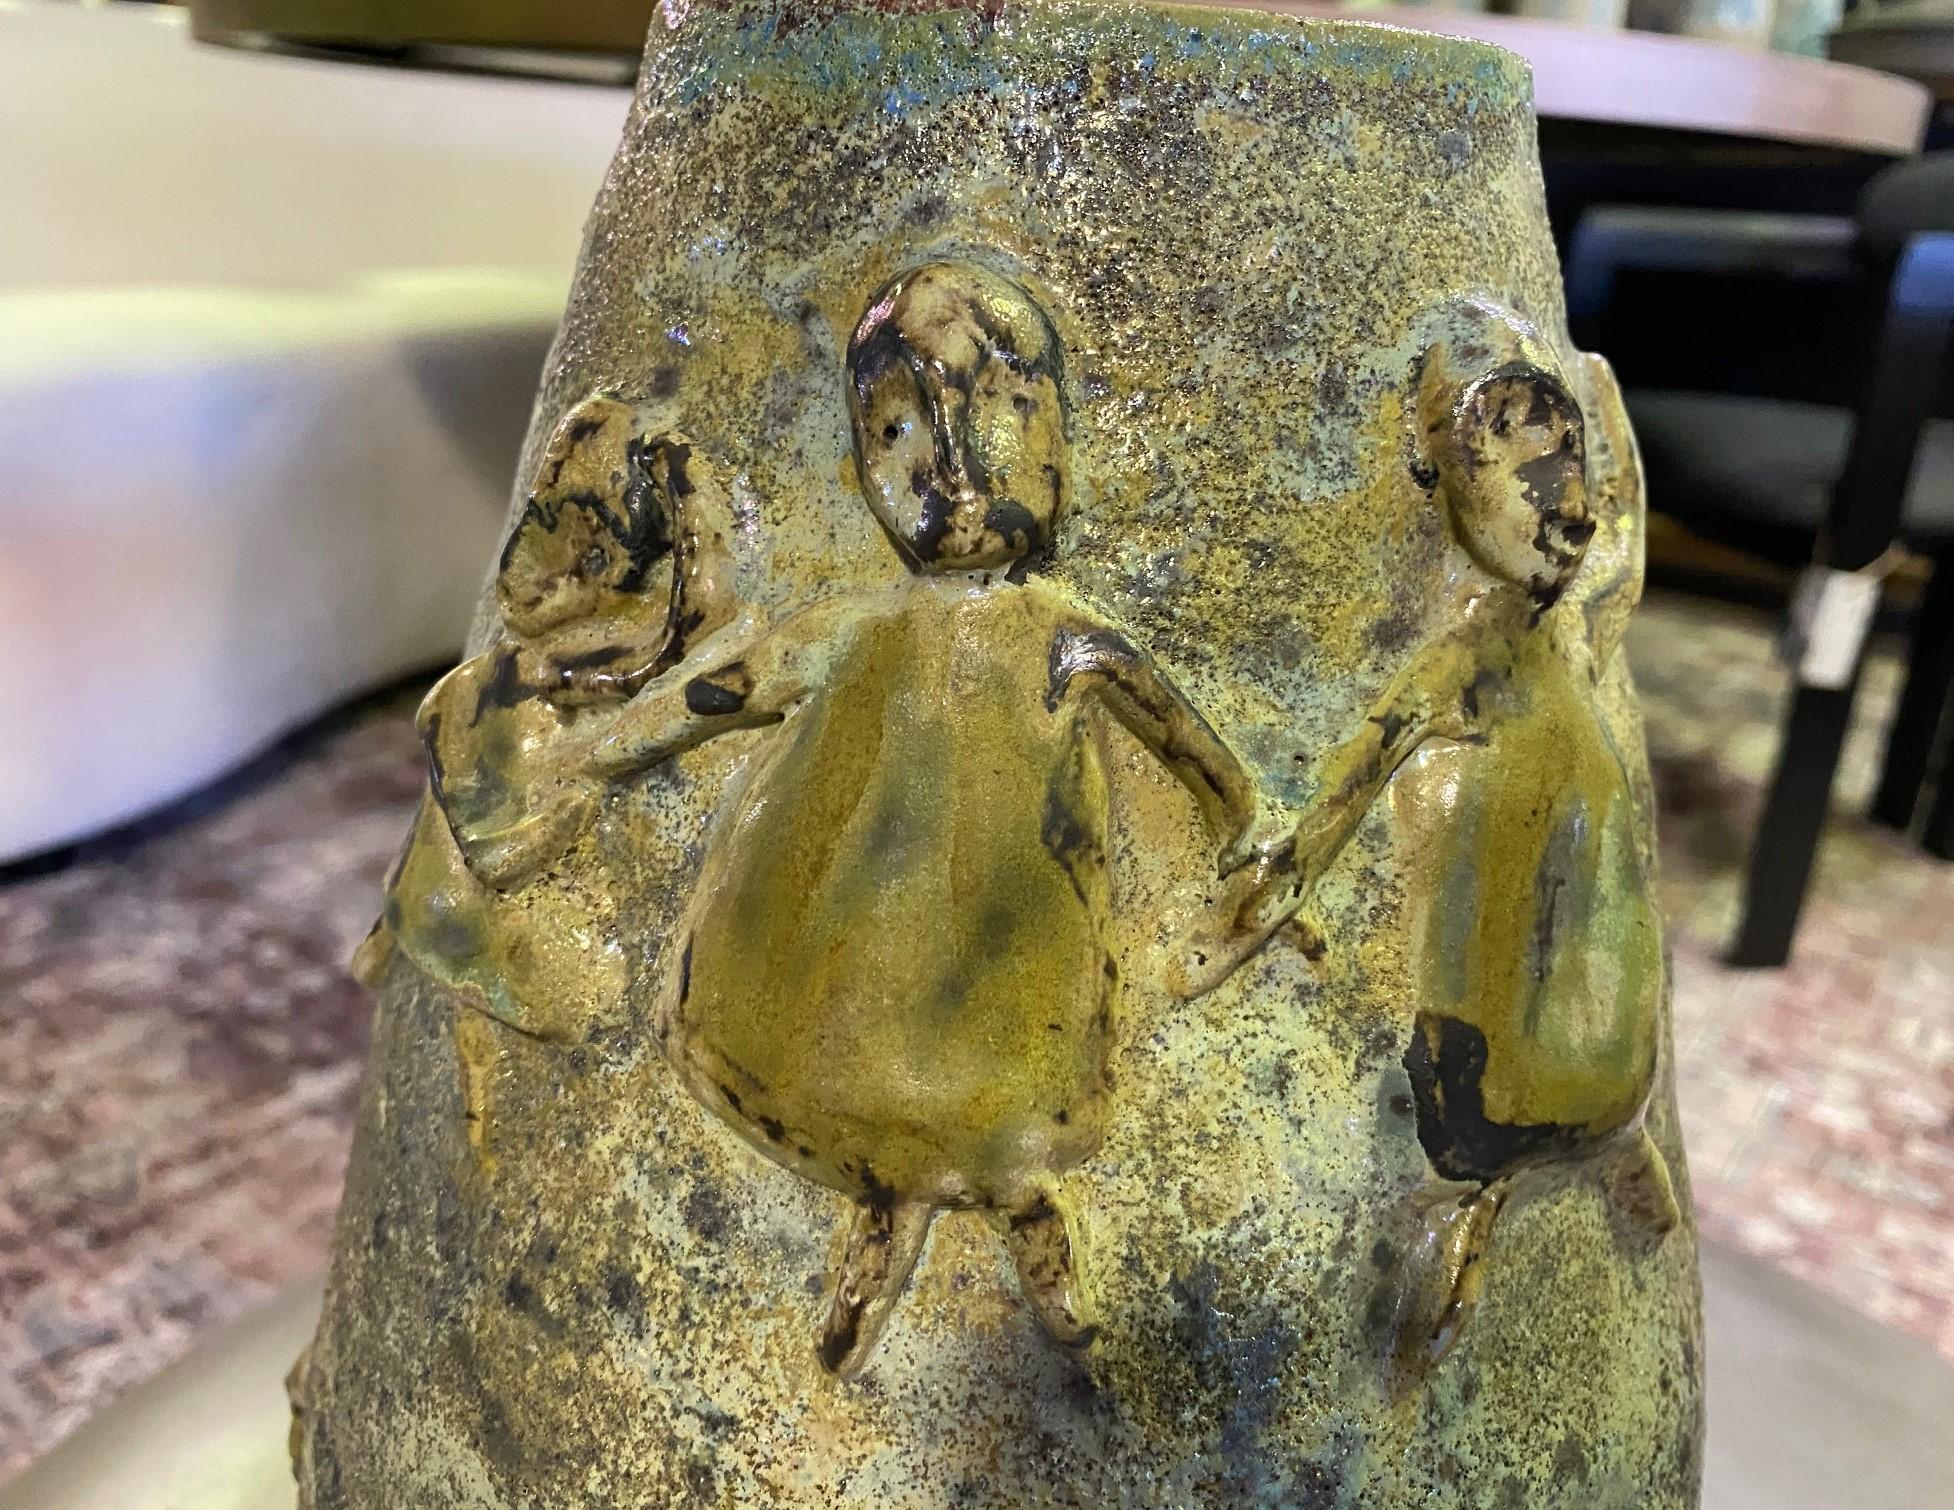 Beatrice Wood Signed Midcentury Monumental Large Figurative Luster Glaze Vase In Good Condition For Sale In Studio City, CA